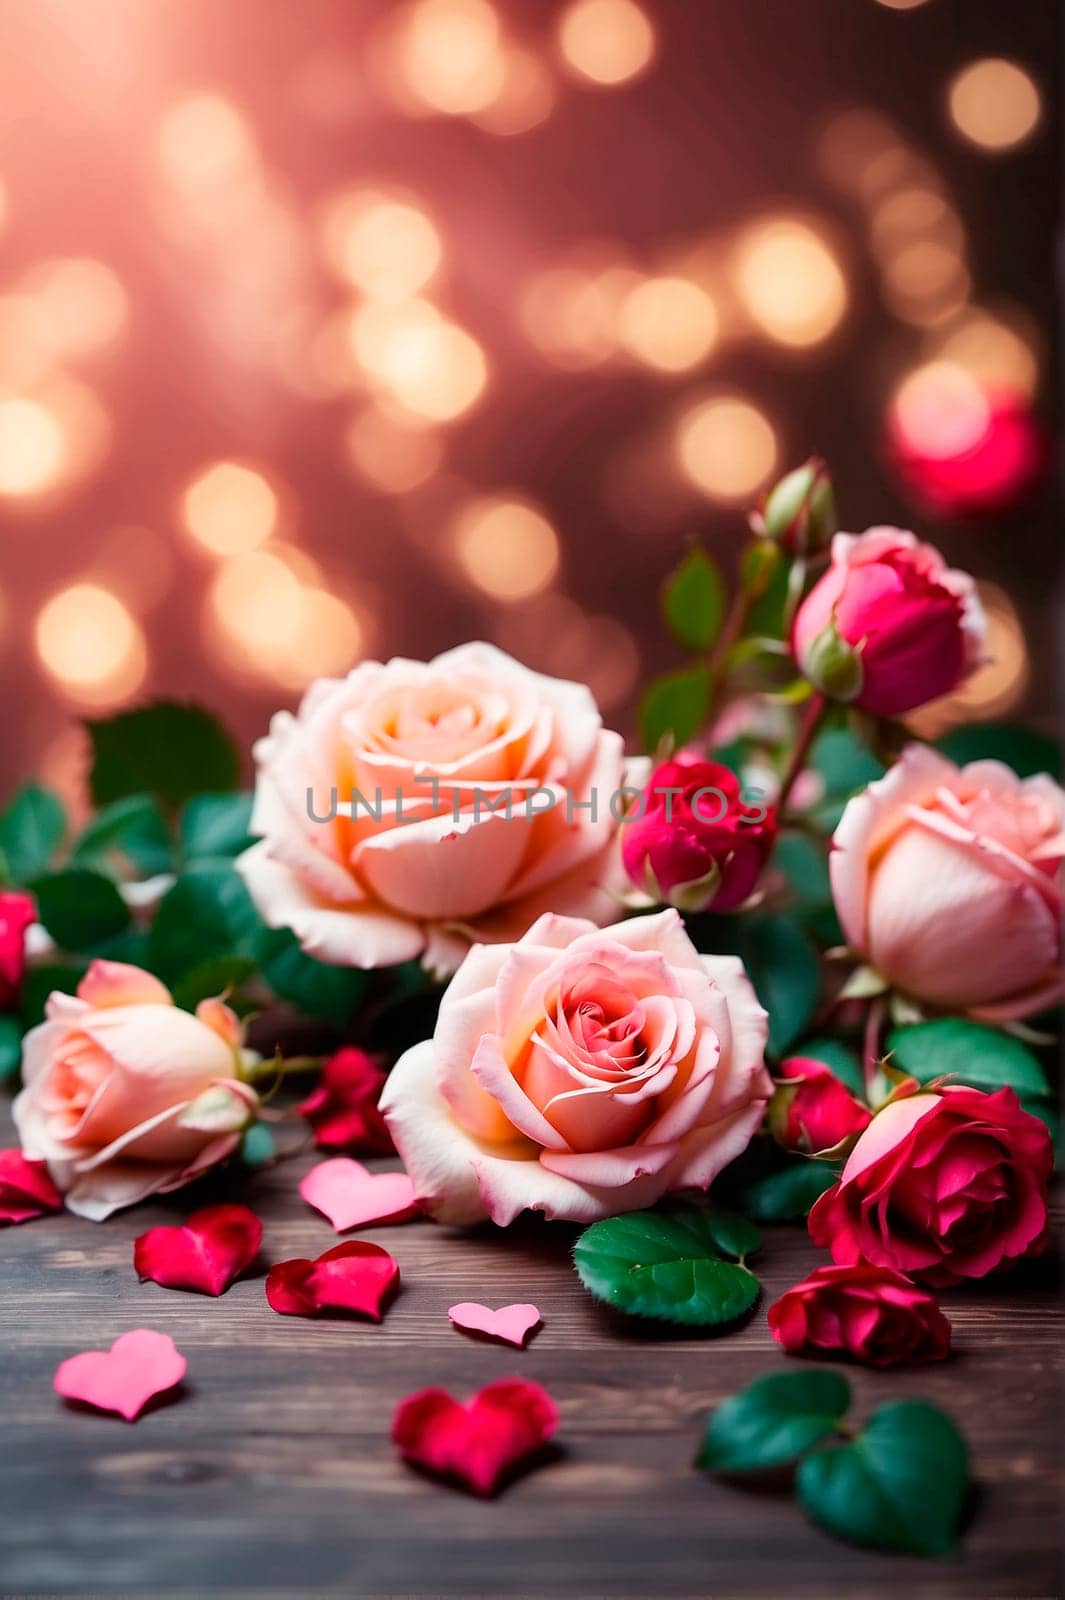 roses and hearts for Valentine's Day. Selective focus. by yanadjana